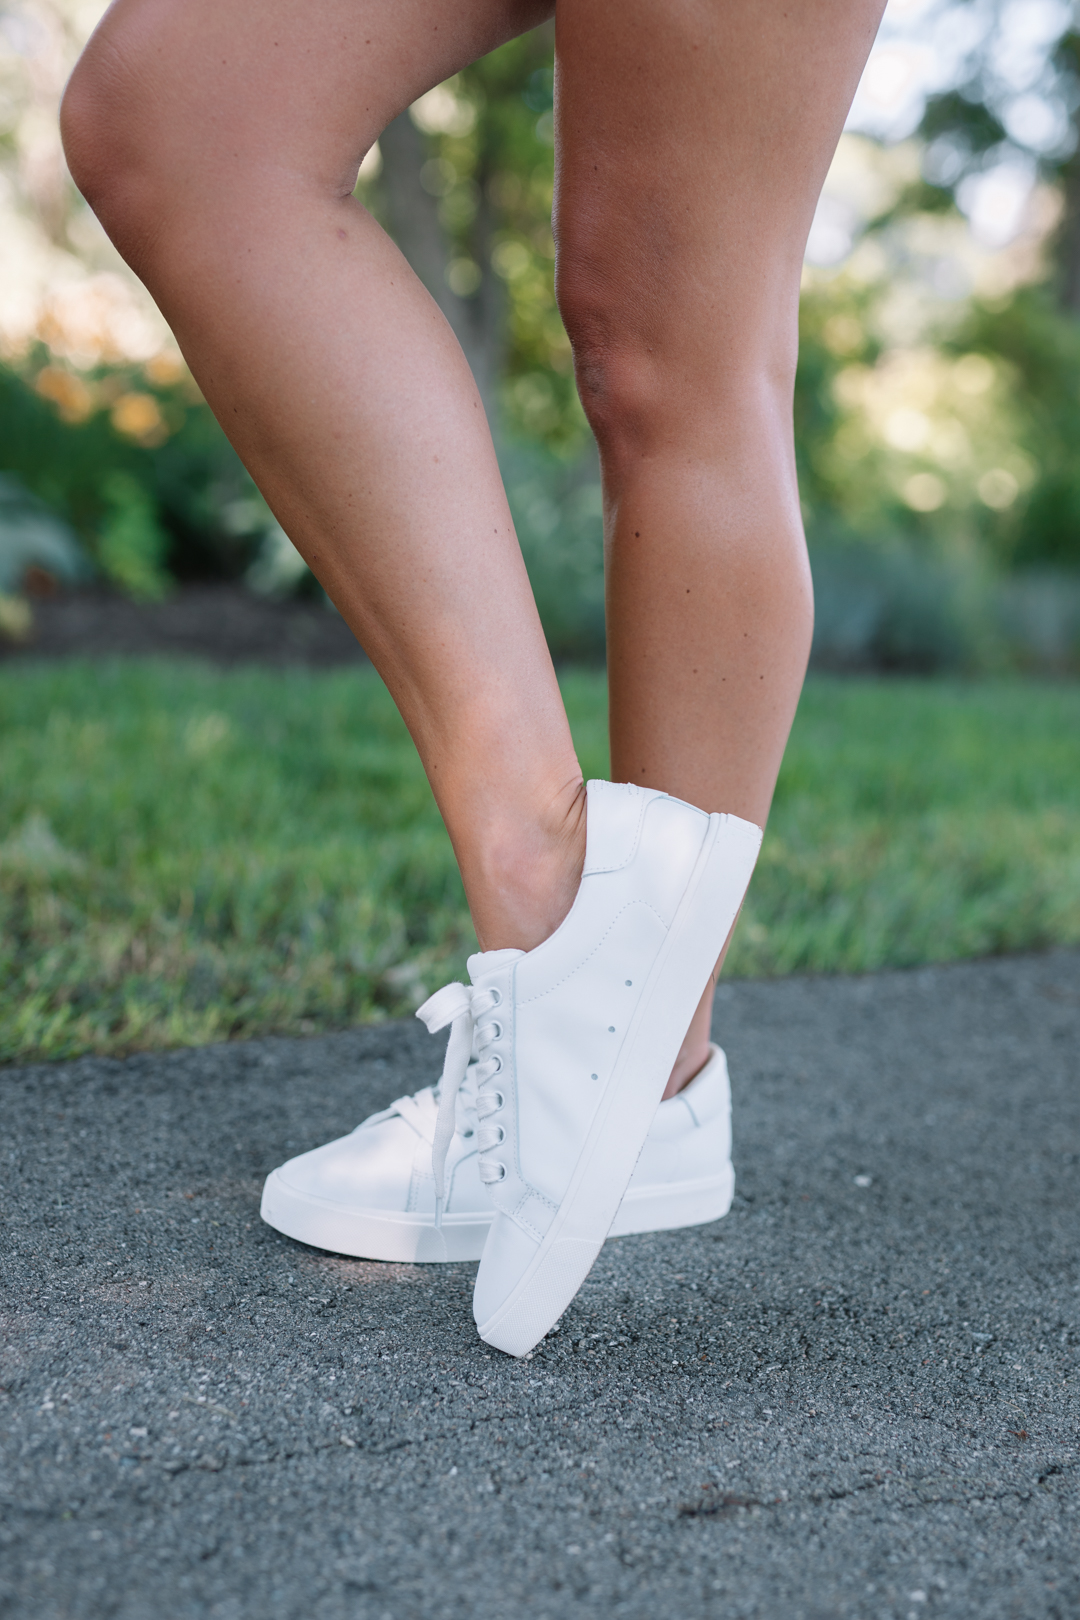 White Sneakers For Summer